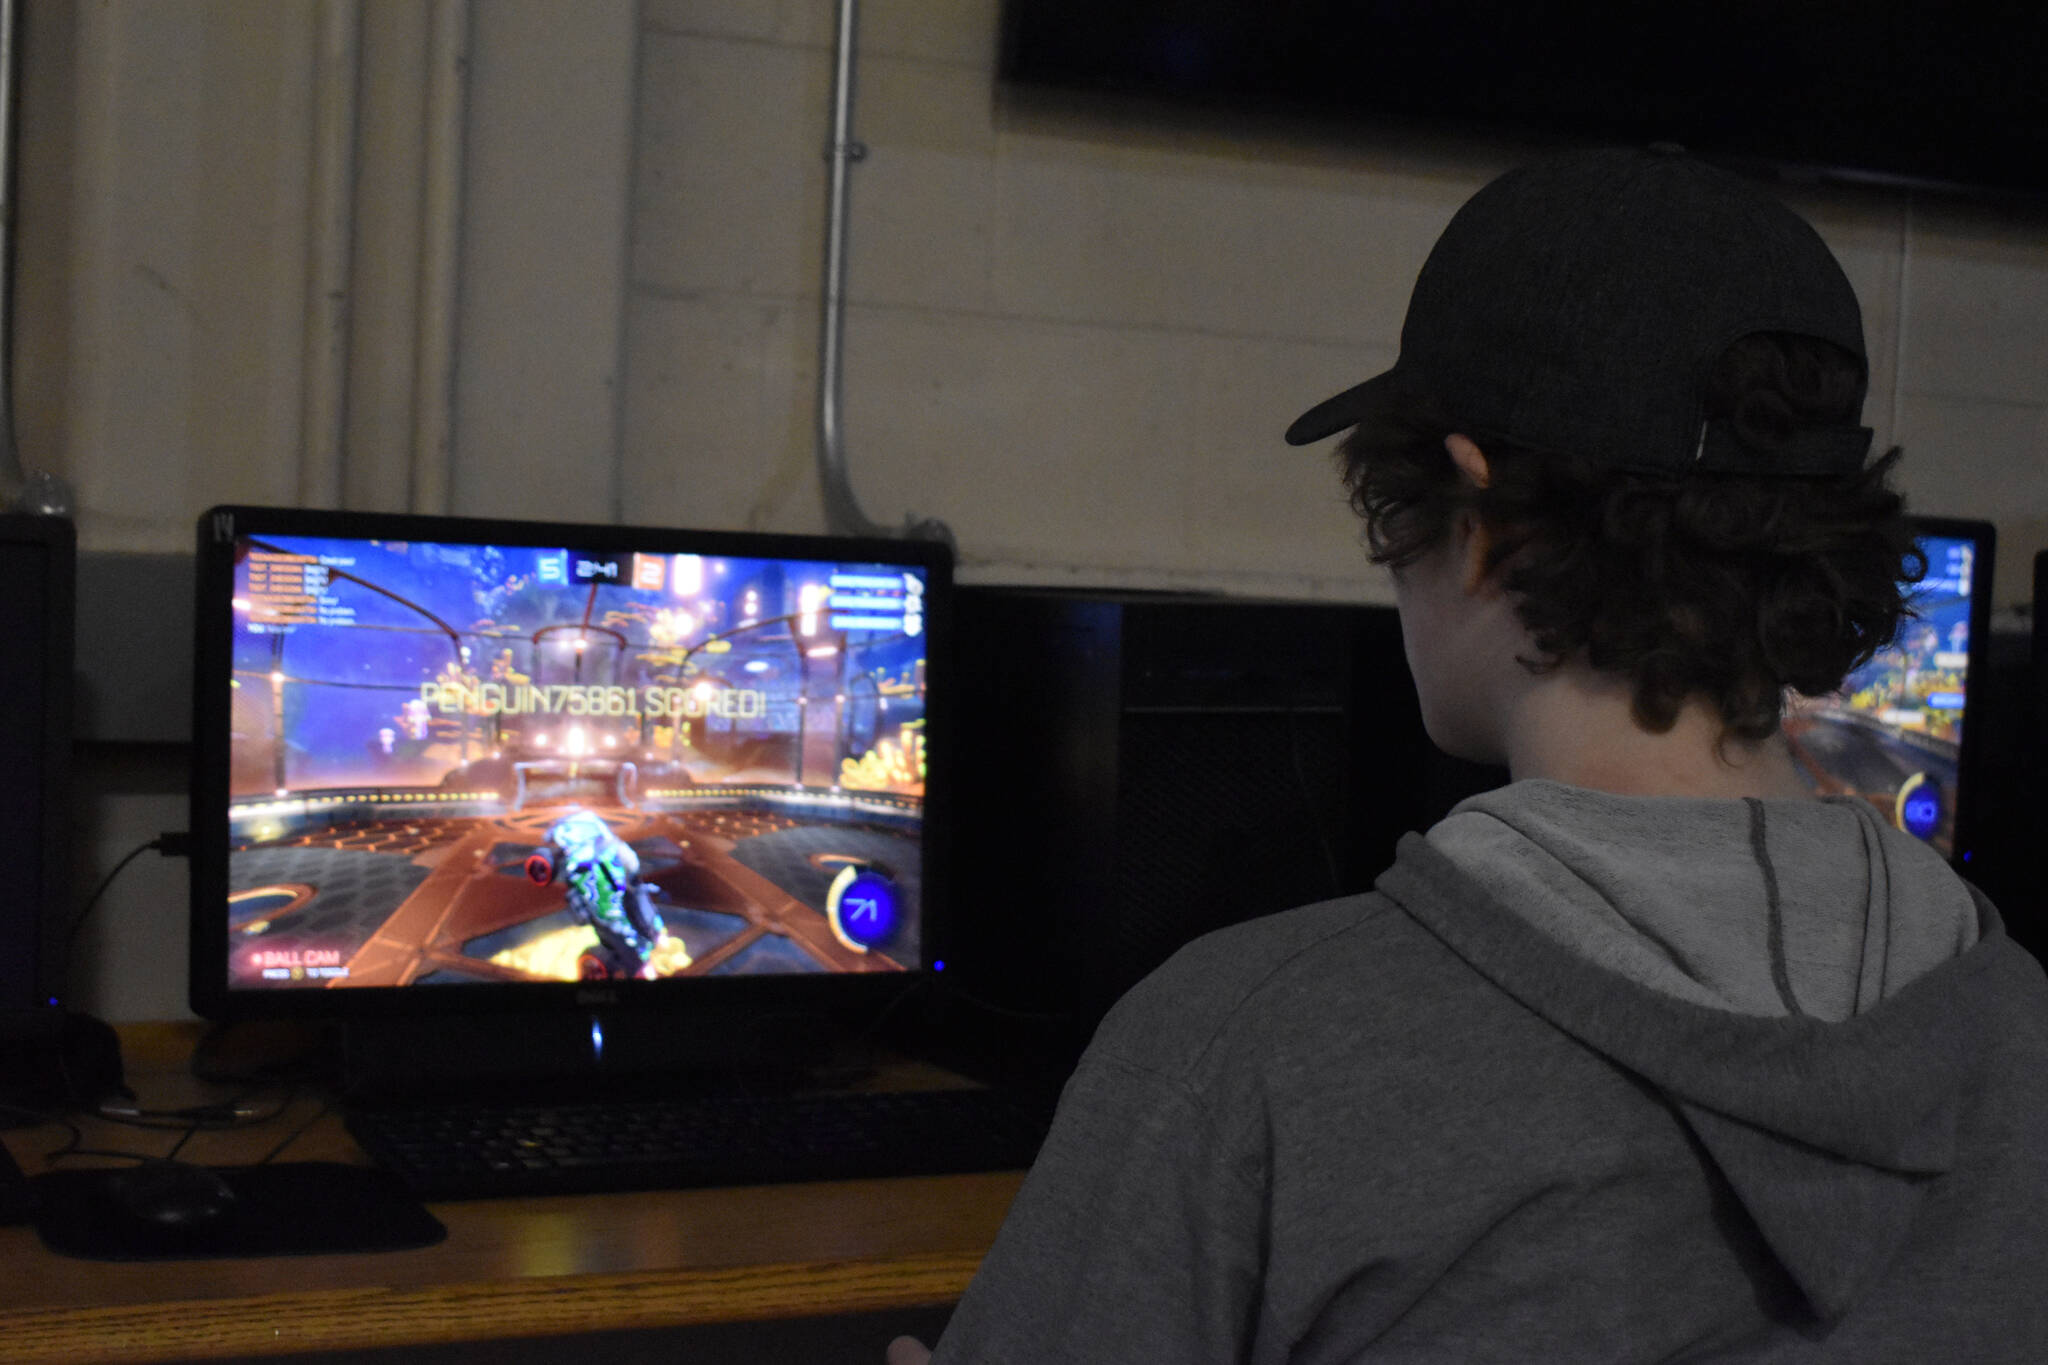 Soldotna High School esports player Ethan Boehme participates in a Rocket League practice match on Thursday, Feb. 23, 2023, at Skyview Middle School in Soldotna, Alaska. (Jake Dye/Peninsula Clarion)